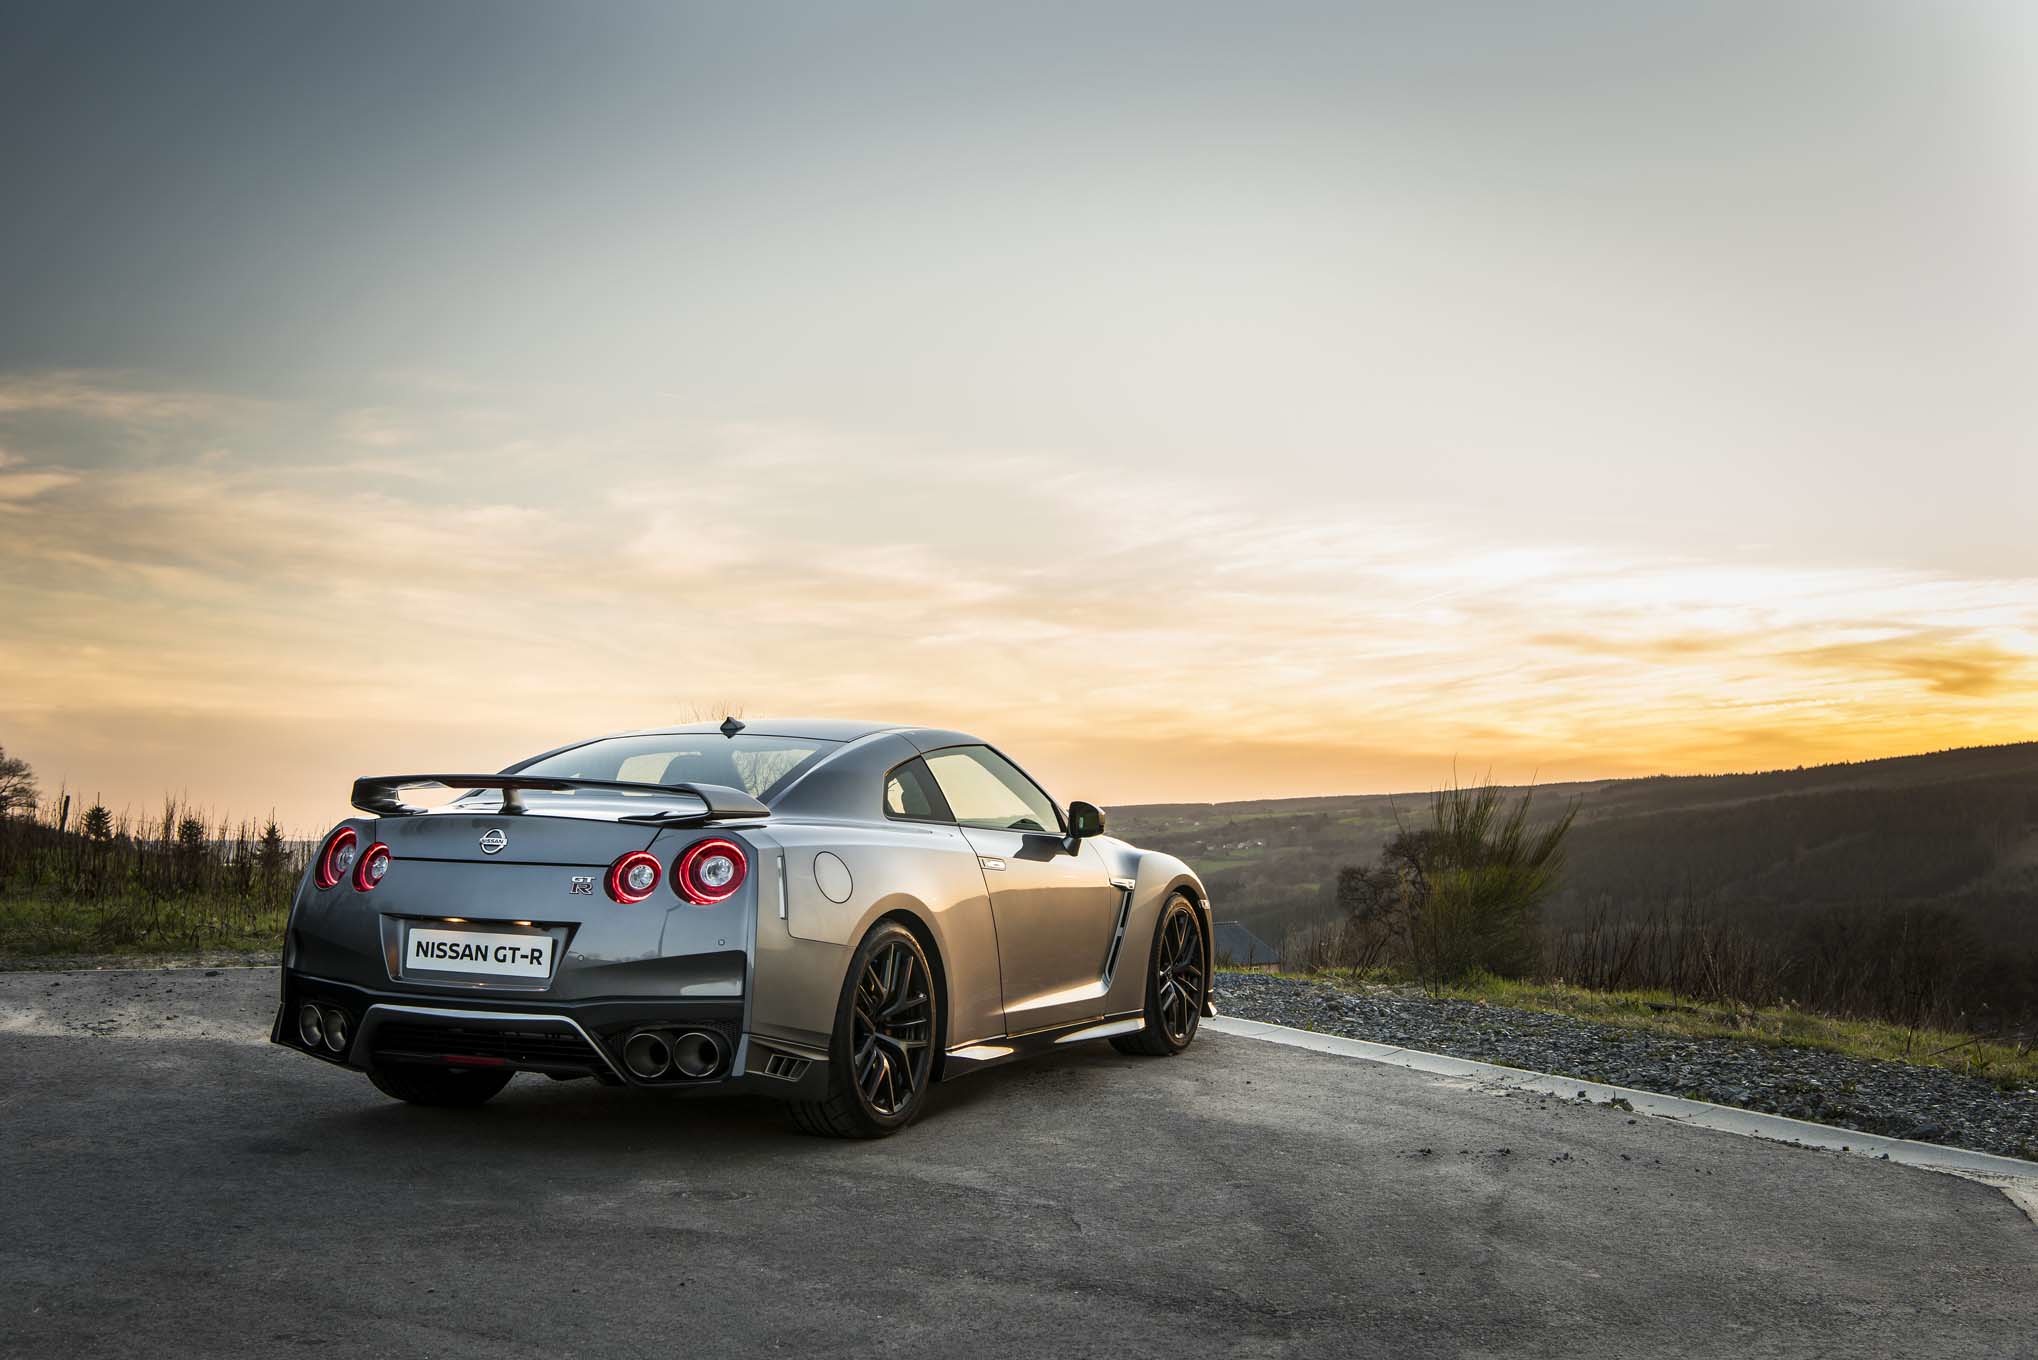 3840x2562 nissan gt r 4k full hd wallpapers new - Coolwallpapers.me!